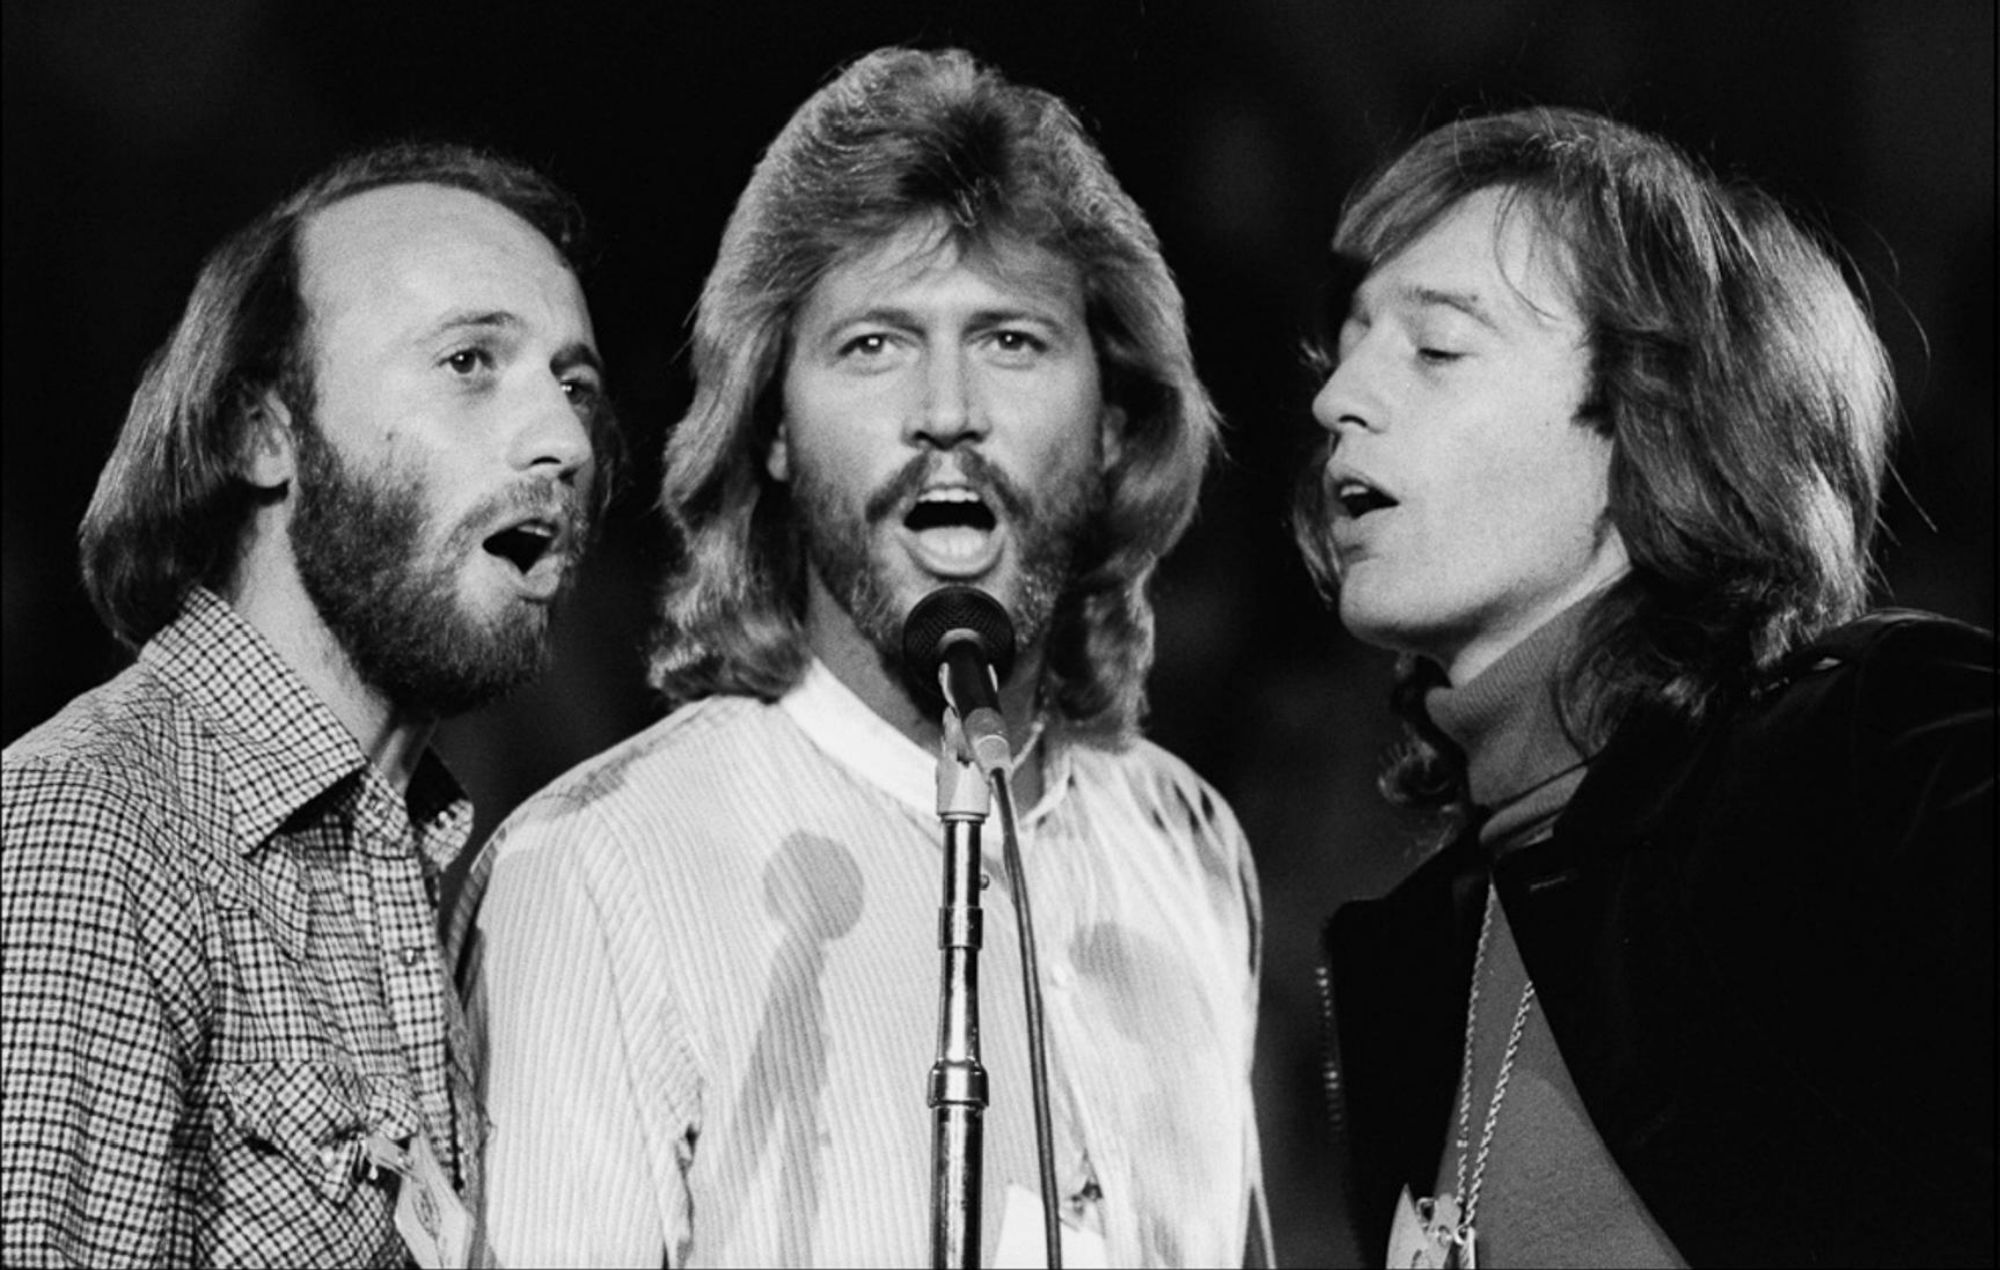 THE COMPLETE STORY BEE GEES 2021 